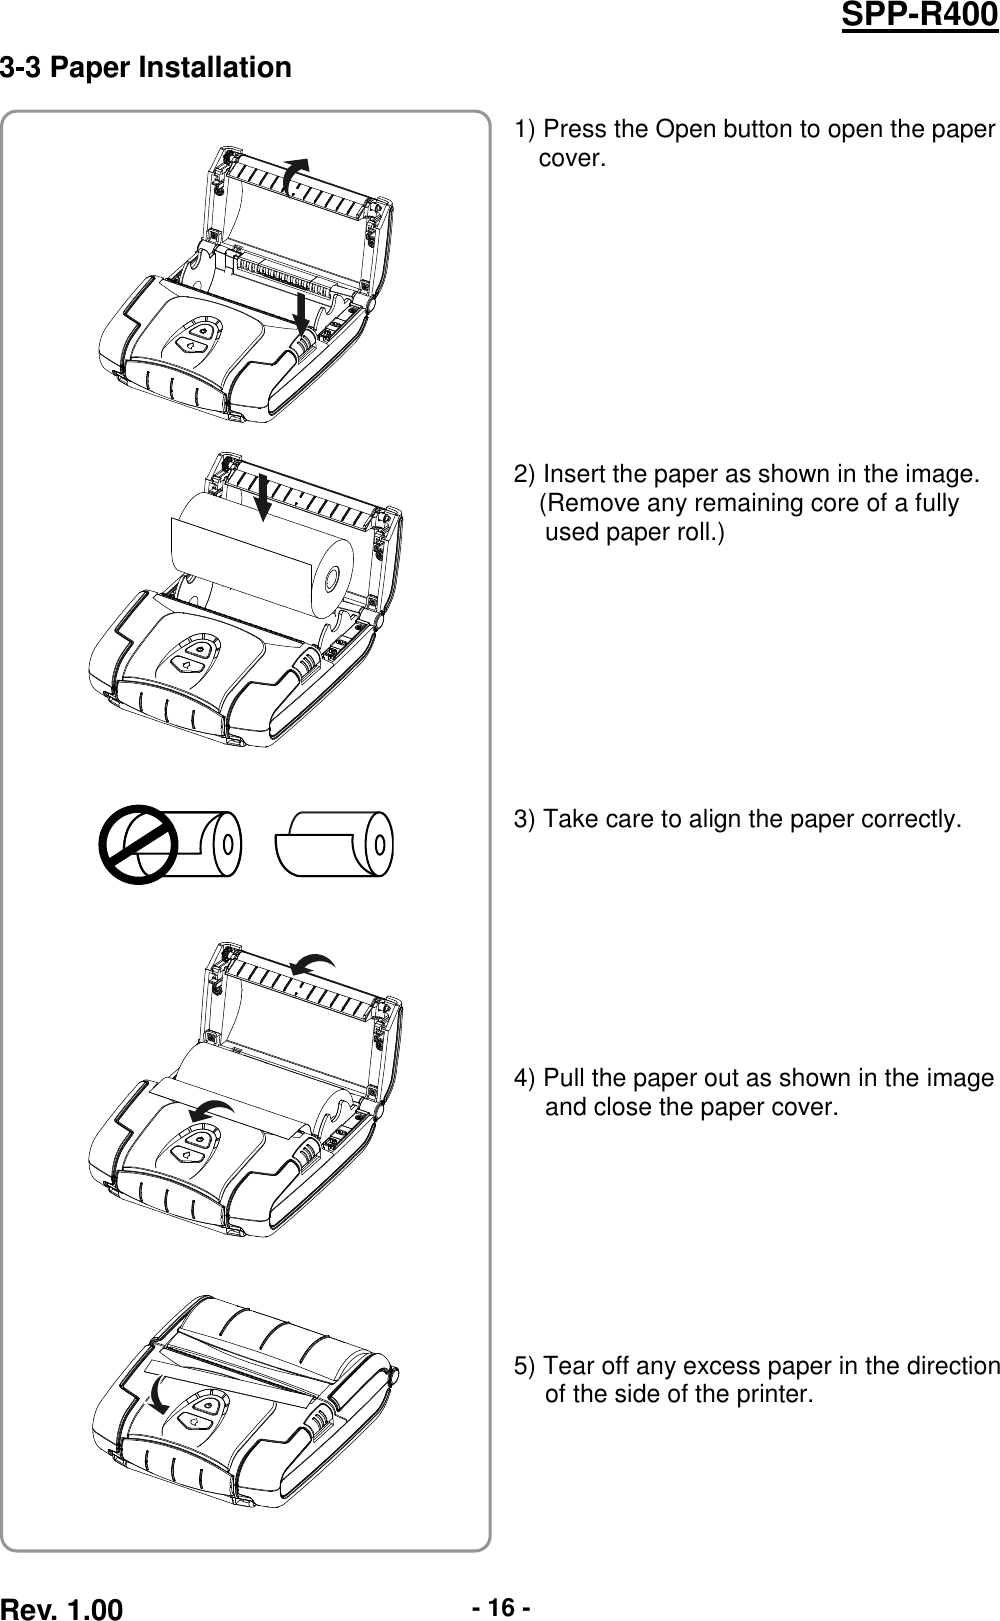  Rev. 1.00 - 16 - SPP-R400 3-3 Paper Installation   1) Press the Open button to open the paper cover.           2) Insert the paper as shown in the image. (Remove any remaining core of a fully used paper roll.)          3) Take care to align the paper correctly.         4) Pull the paper out as shown in the image and close the paper cover.         5) Tear off any excess paper in the direction of the side of the printer.              